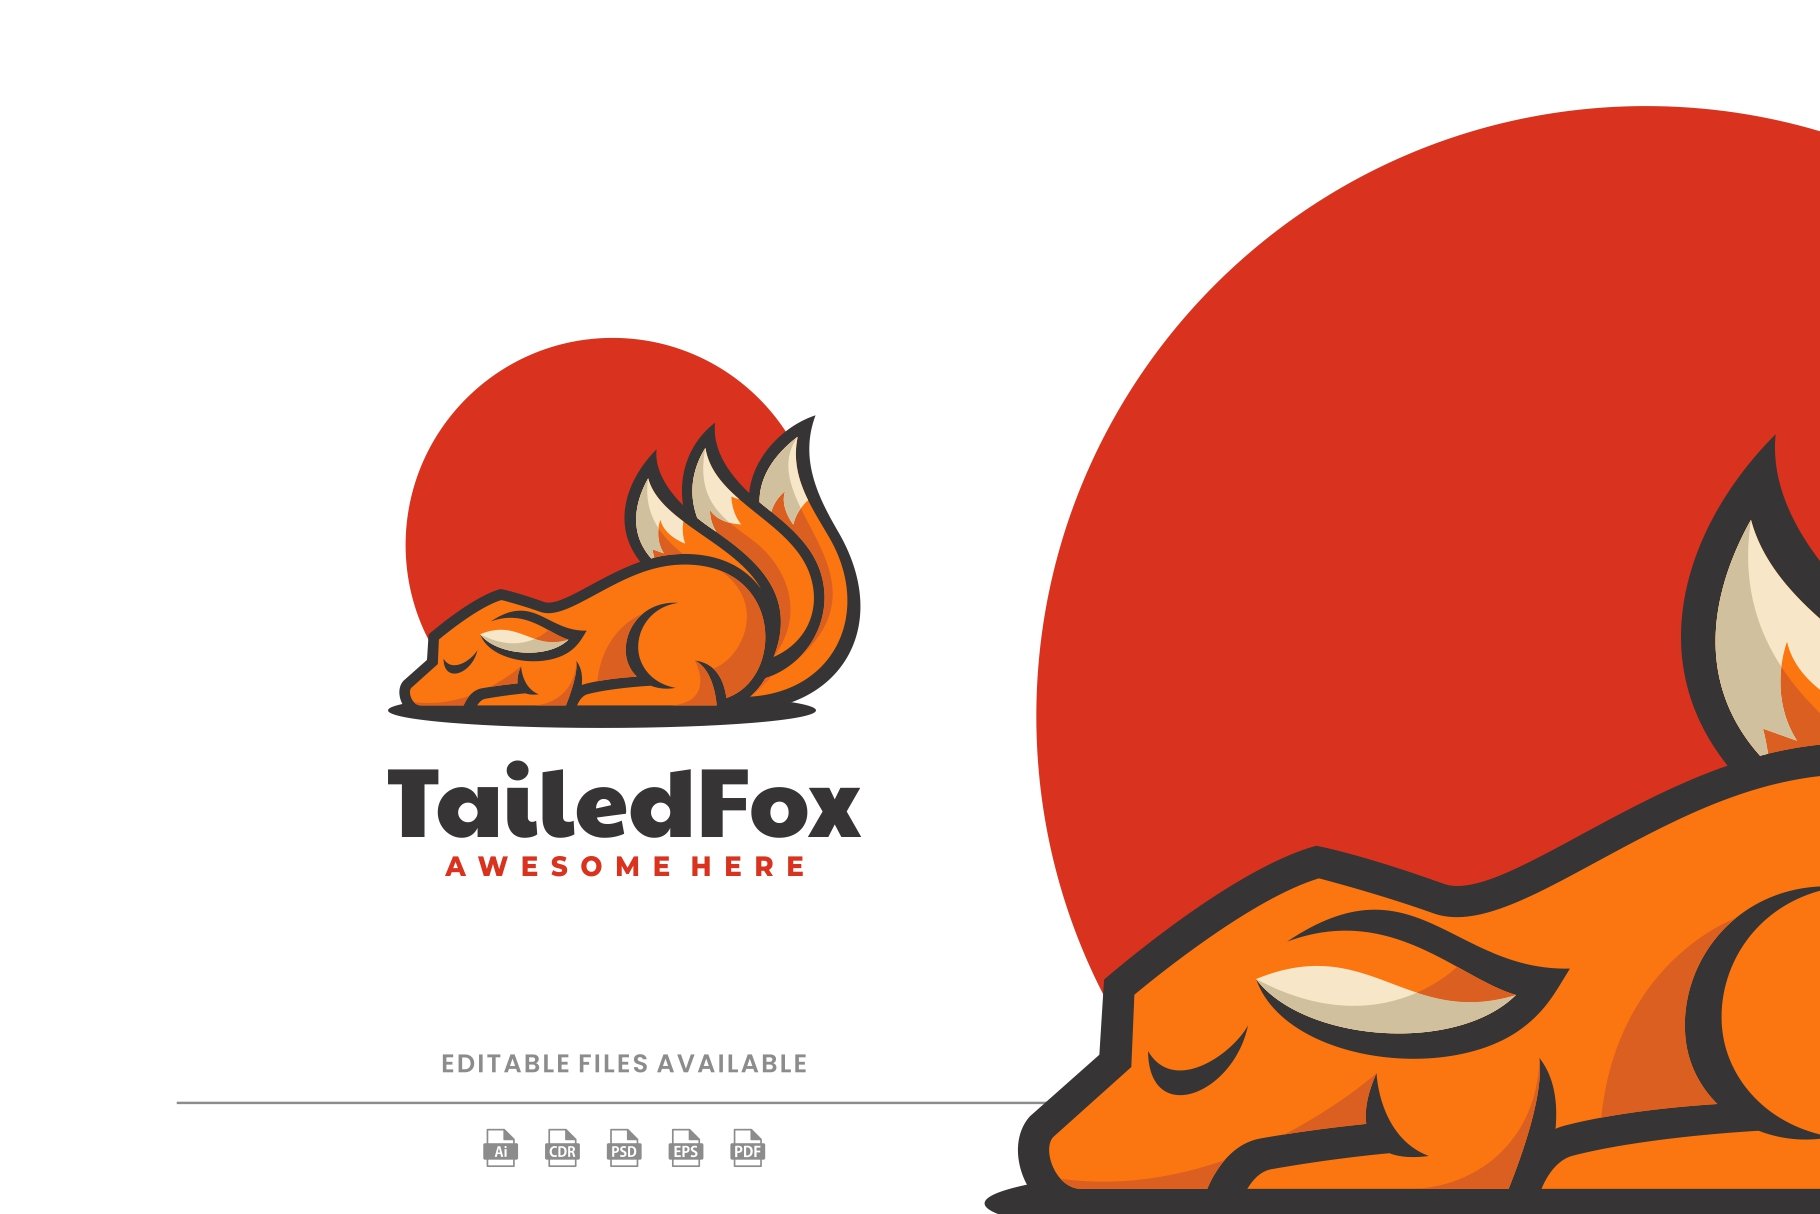 Tailed Fox Simple Mascot Logo cover image.